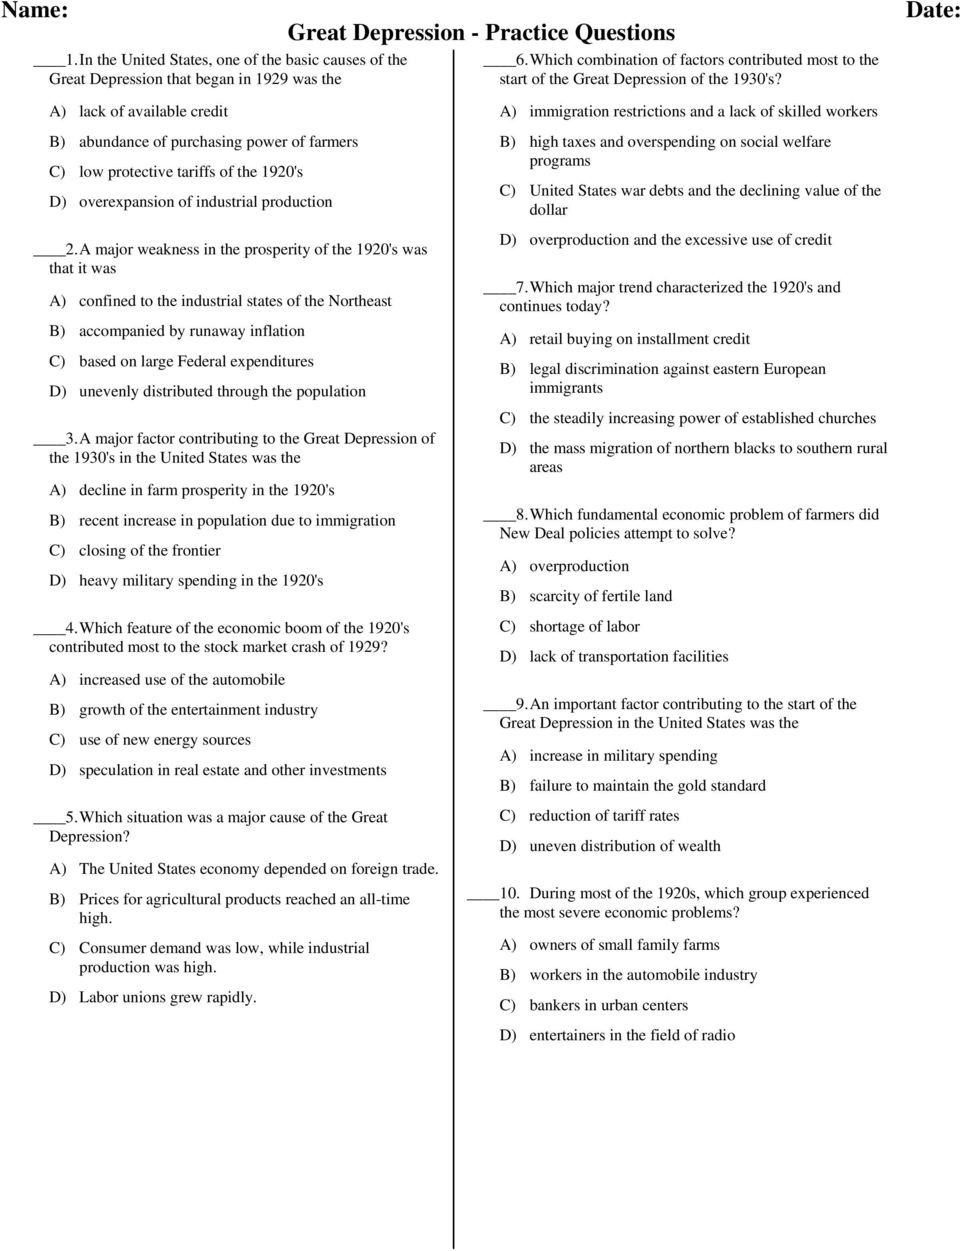 The Great Depression Worksheet Great Depression Practice Questions Pdf Free Download